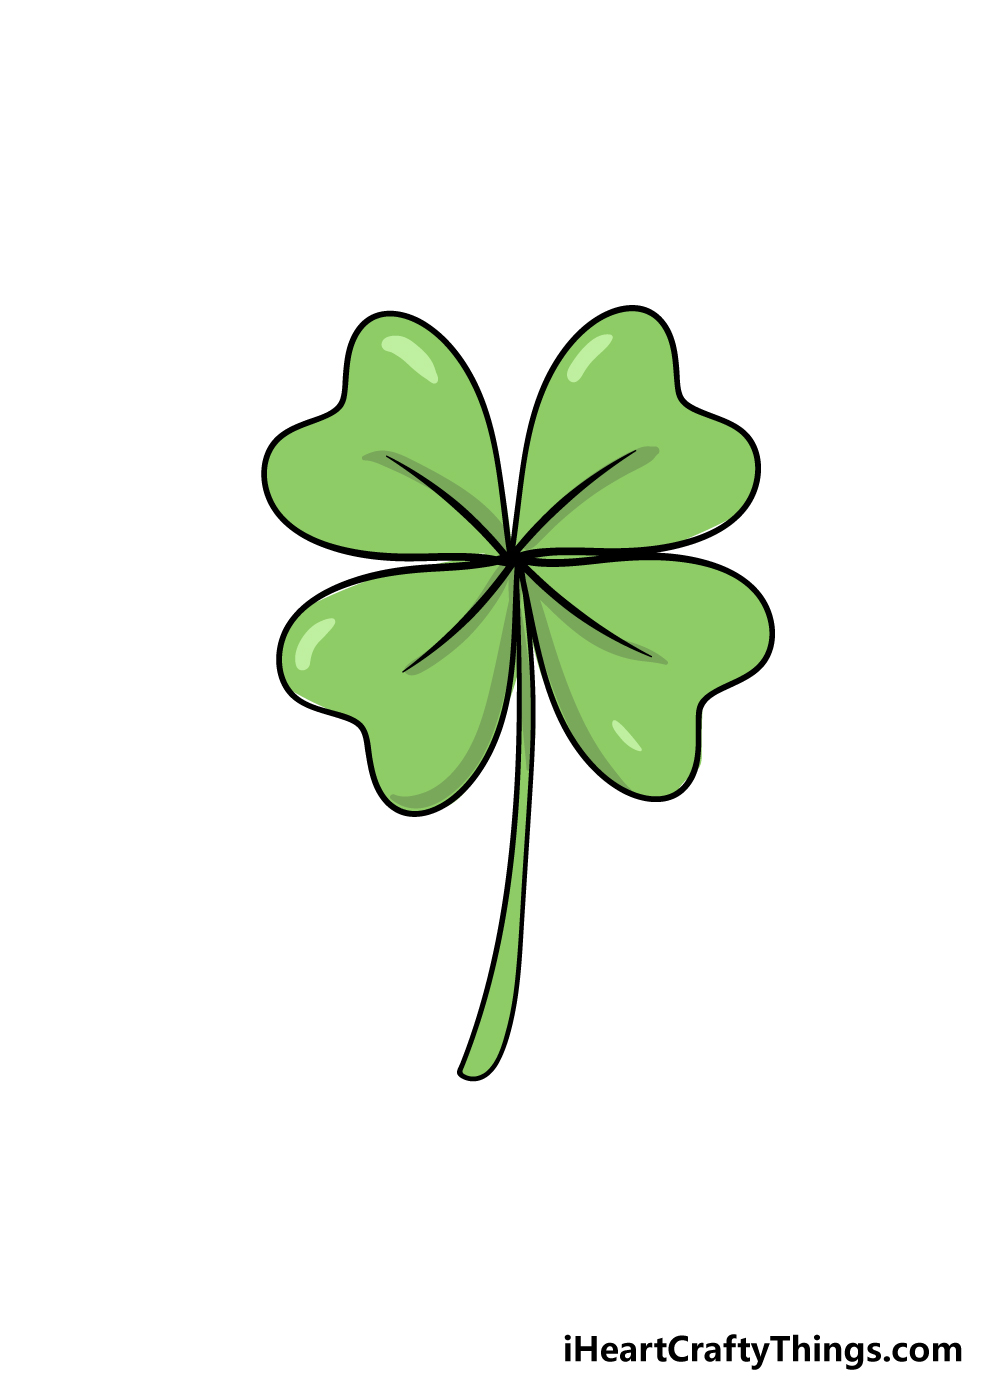 How to Draw A Four-Leaf Clover – A Step by Step Guide